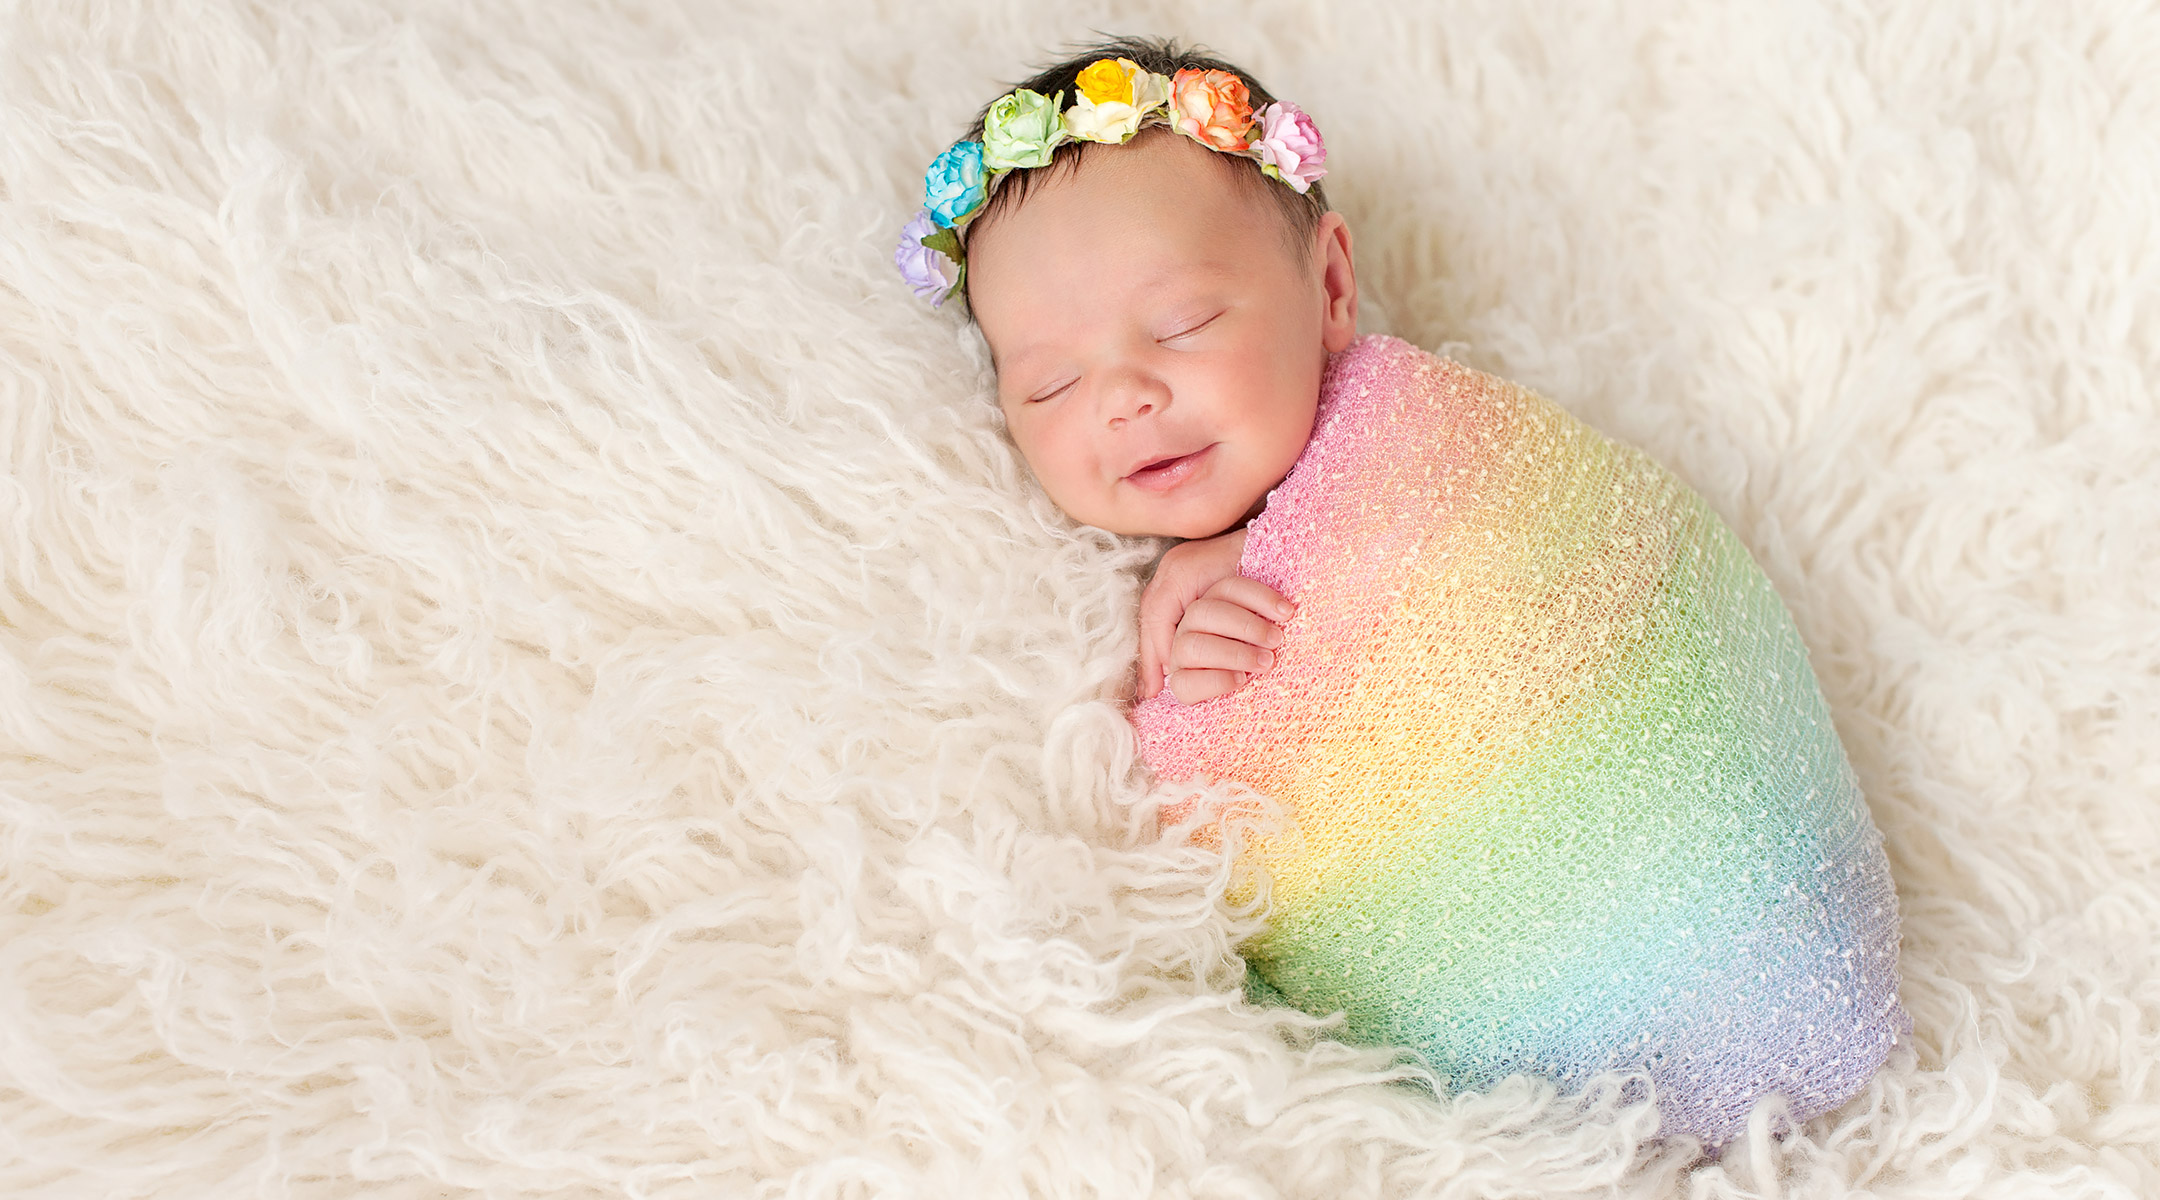 rainbow baby coming home outfit girl